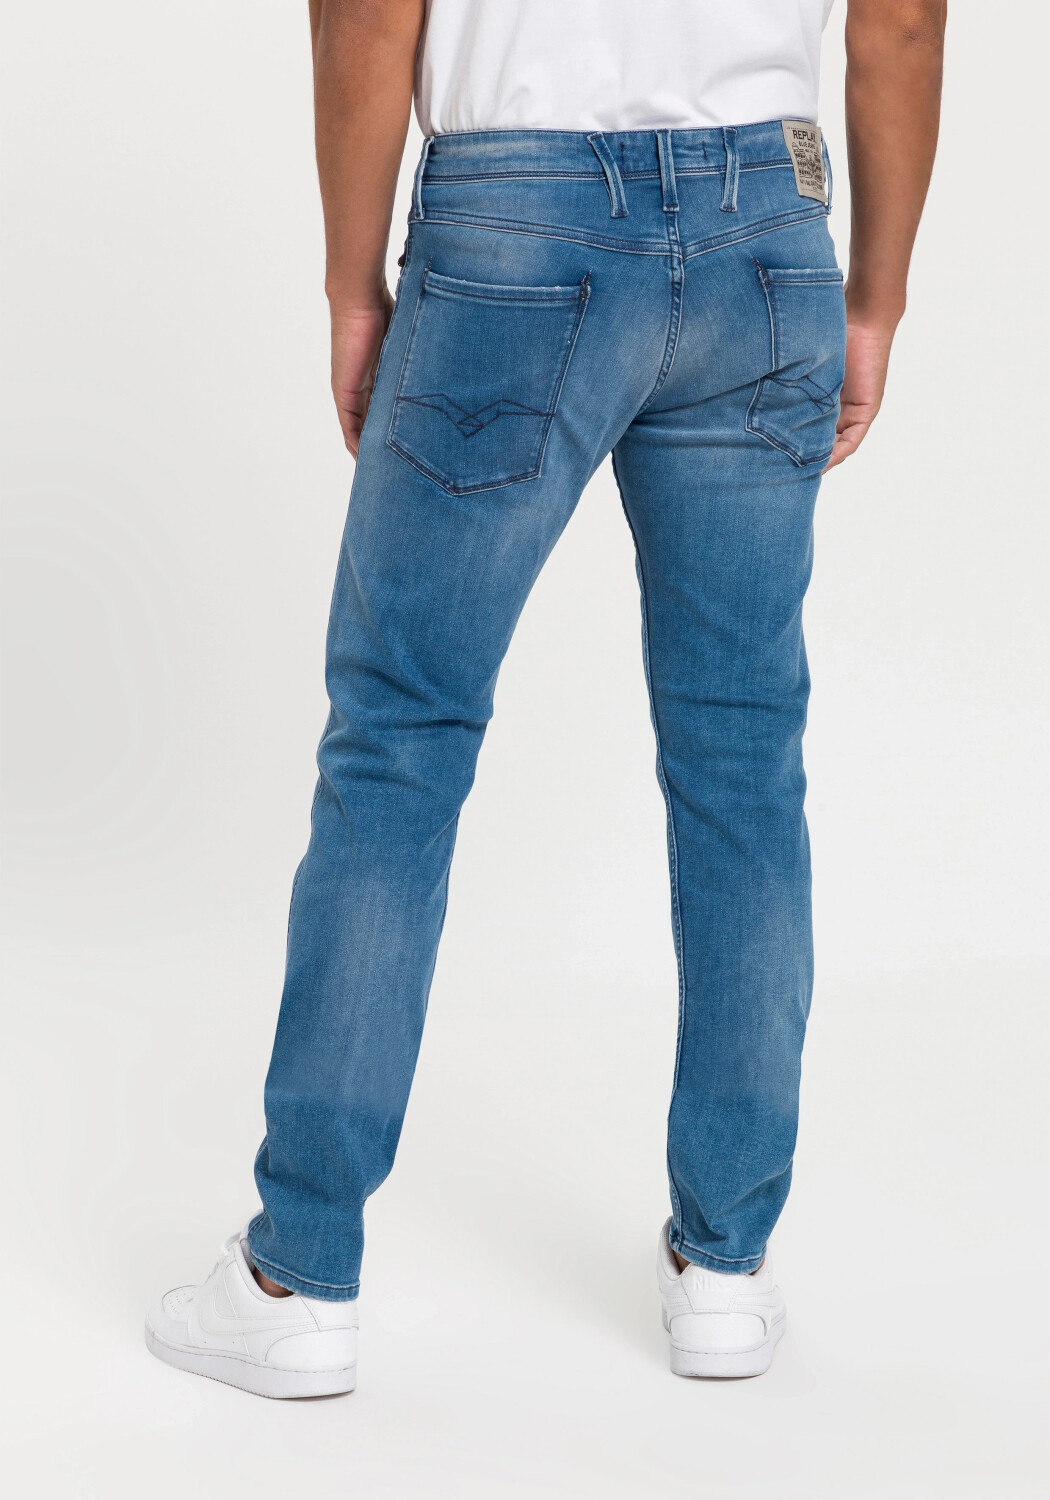 from on Fit (BF5) – blue Anbass Replay Hyperflex Jeans Slim light Deals (Today) Best Buy £48.27